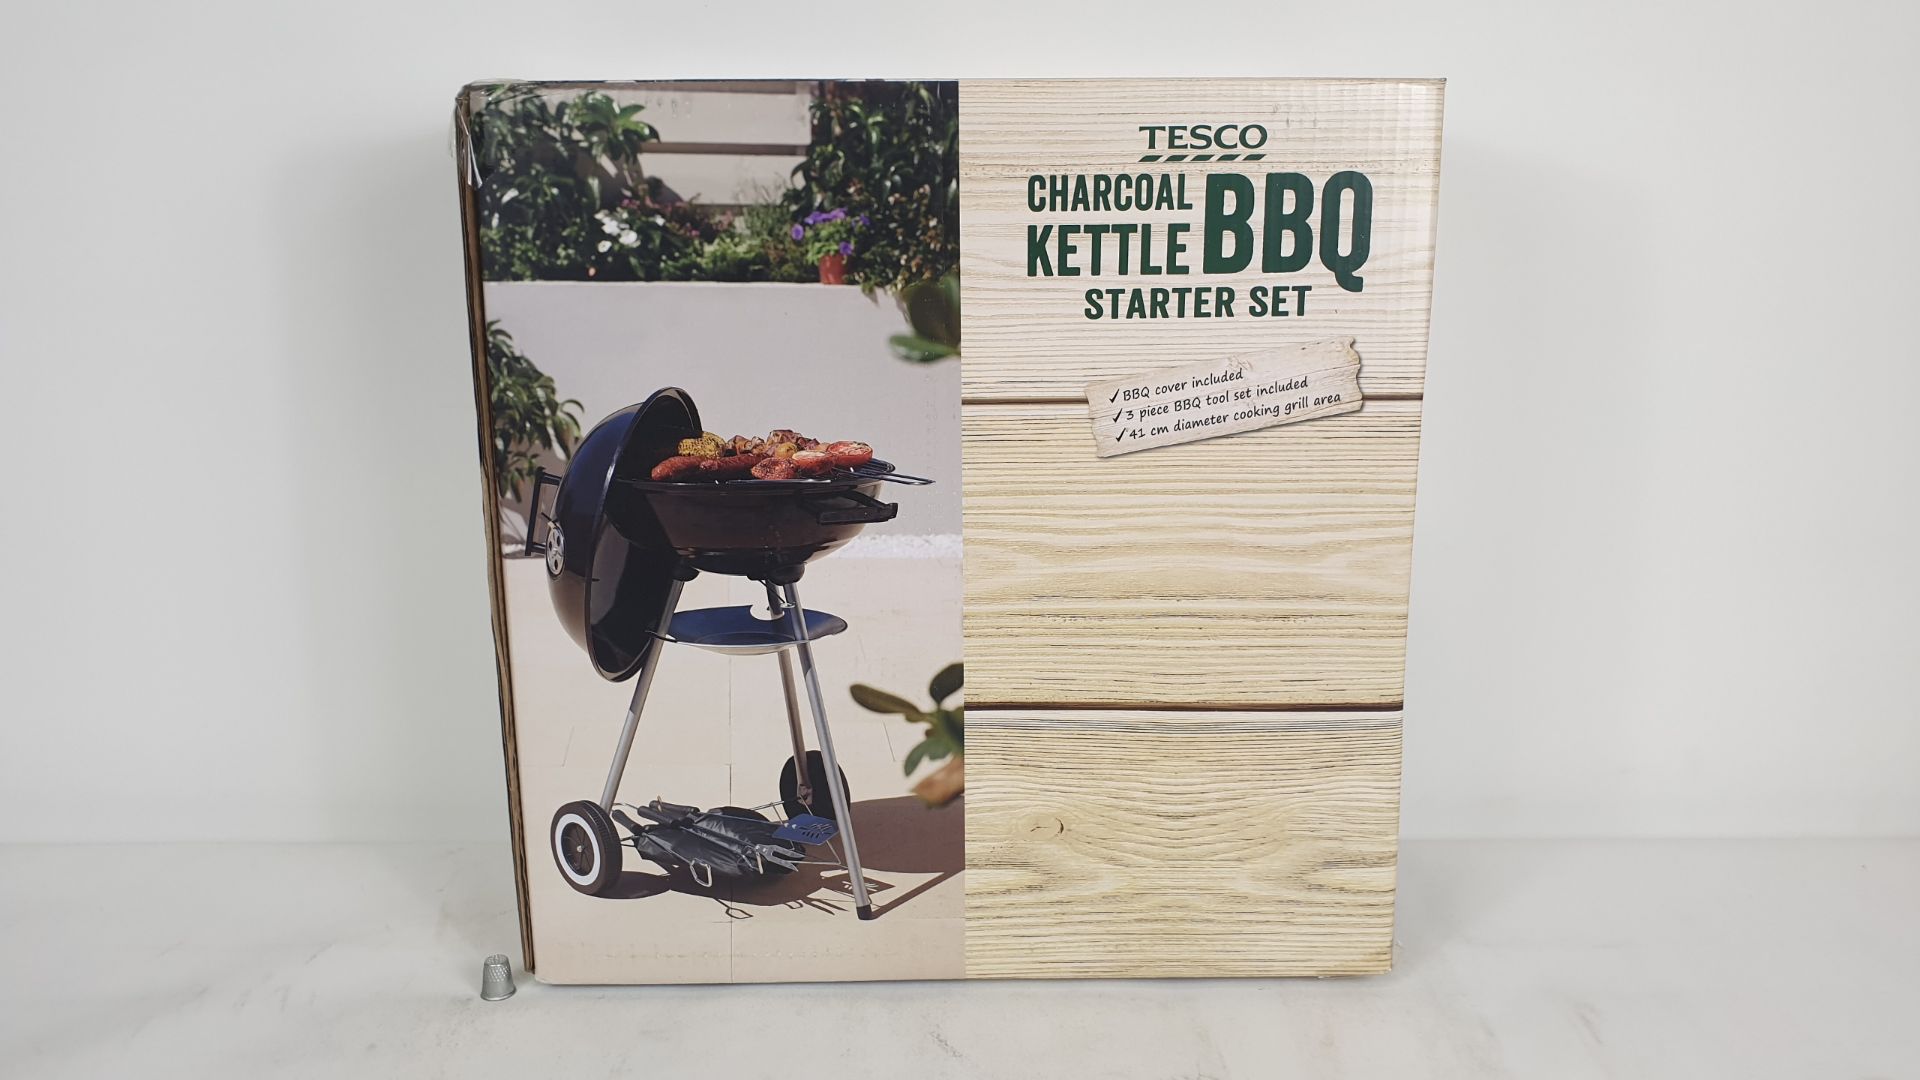 8 X TESCO CHARCOAL KETTLE BARBEQUE STARTER SETS (INCLUDES BBQ WITH 41CM DIA GRILL AREA, 3 PC TOOL